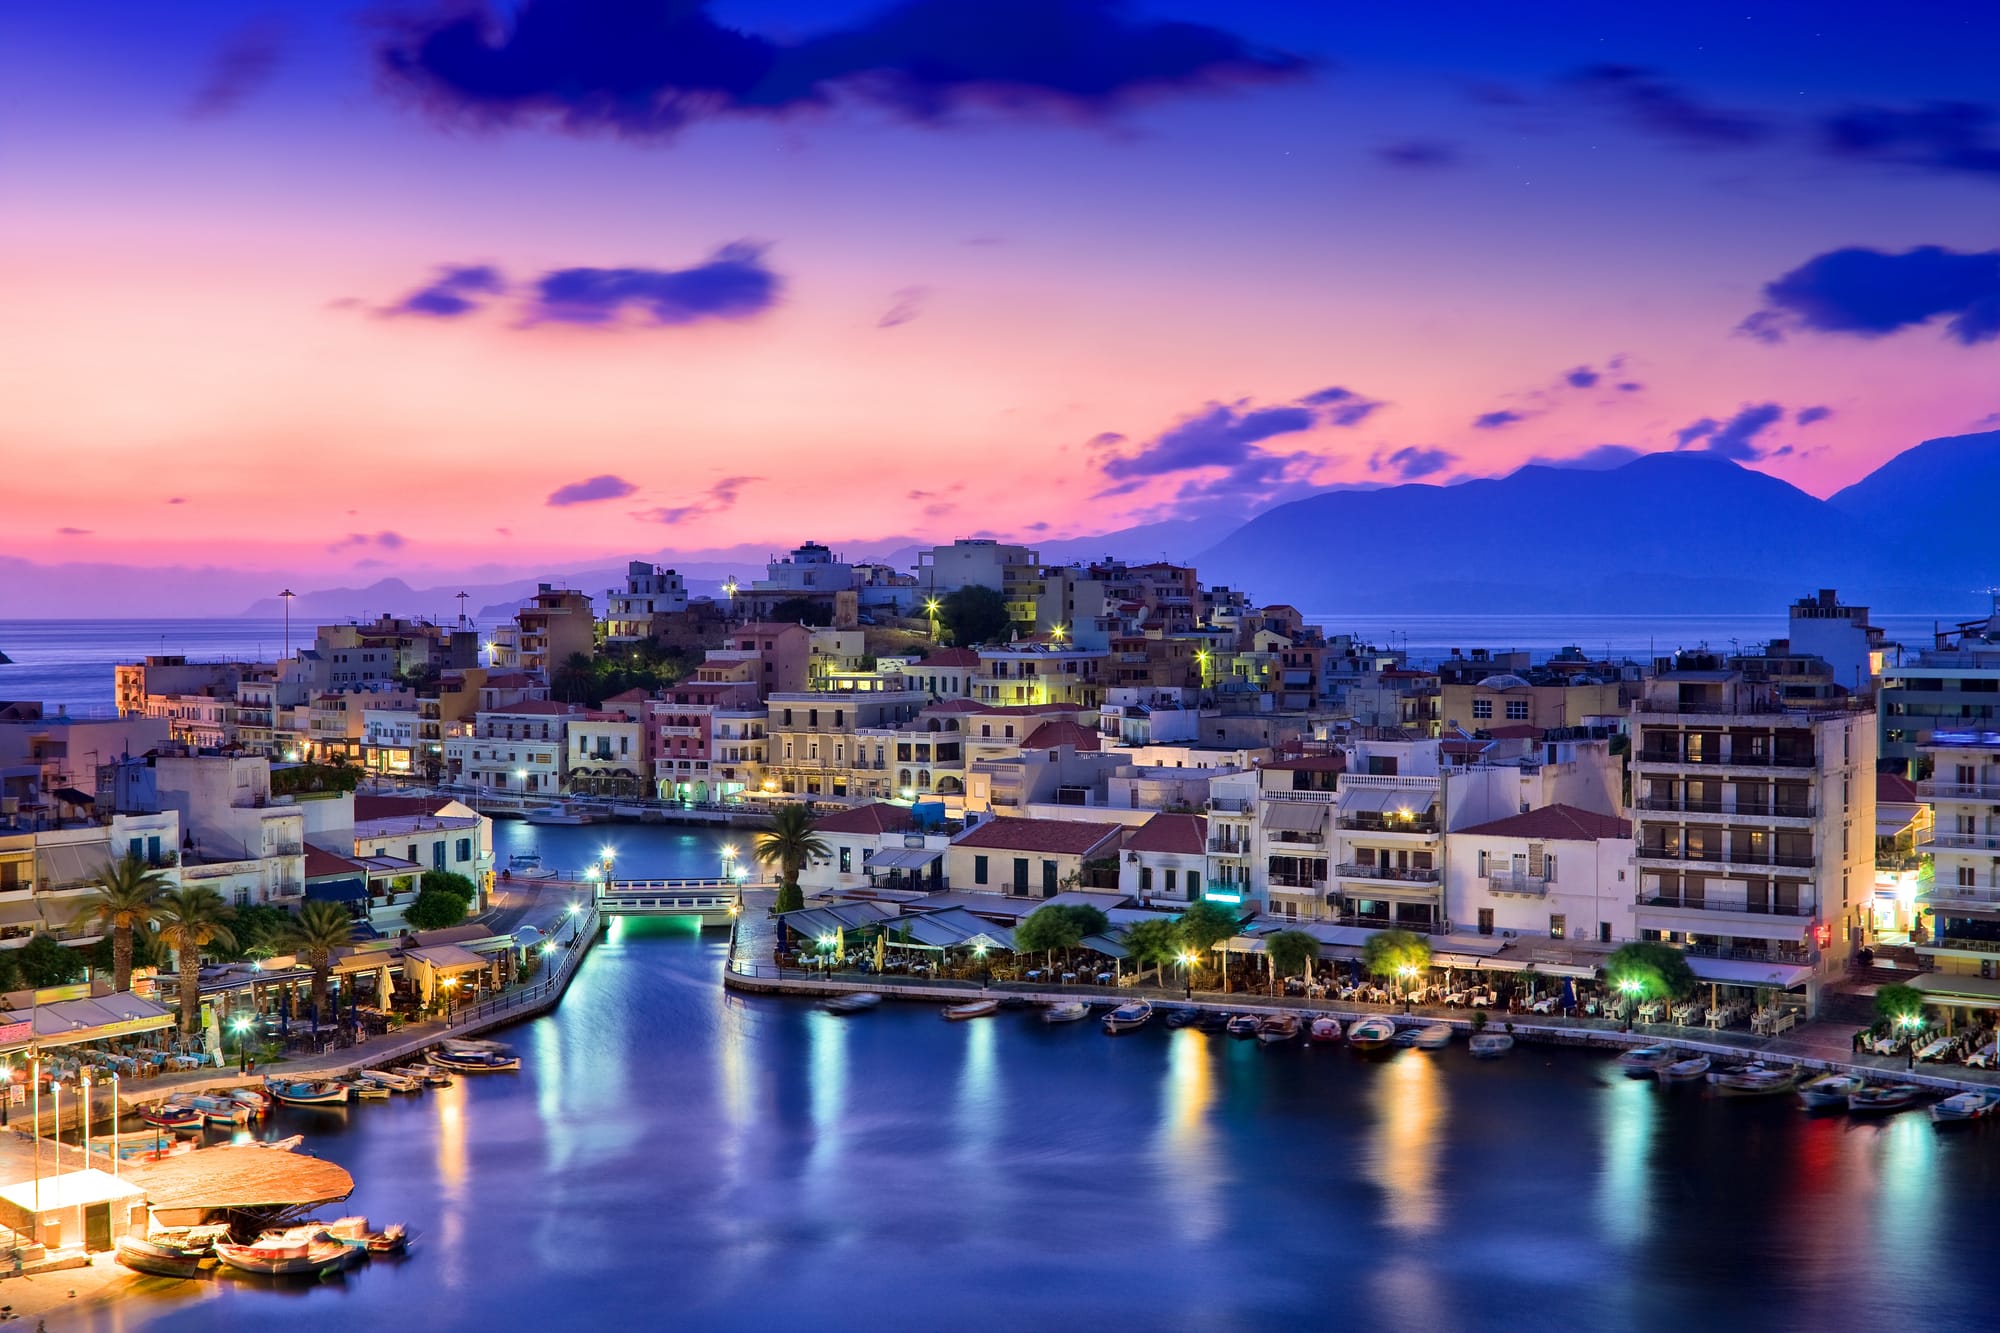 Best Places To Visit In Europe In Spring (Pictured - Agios Nikolaos, Crete)